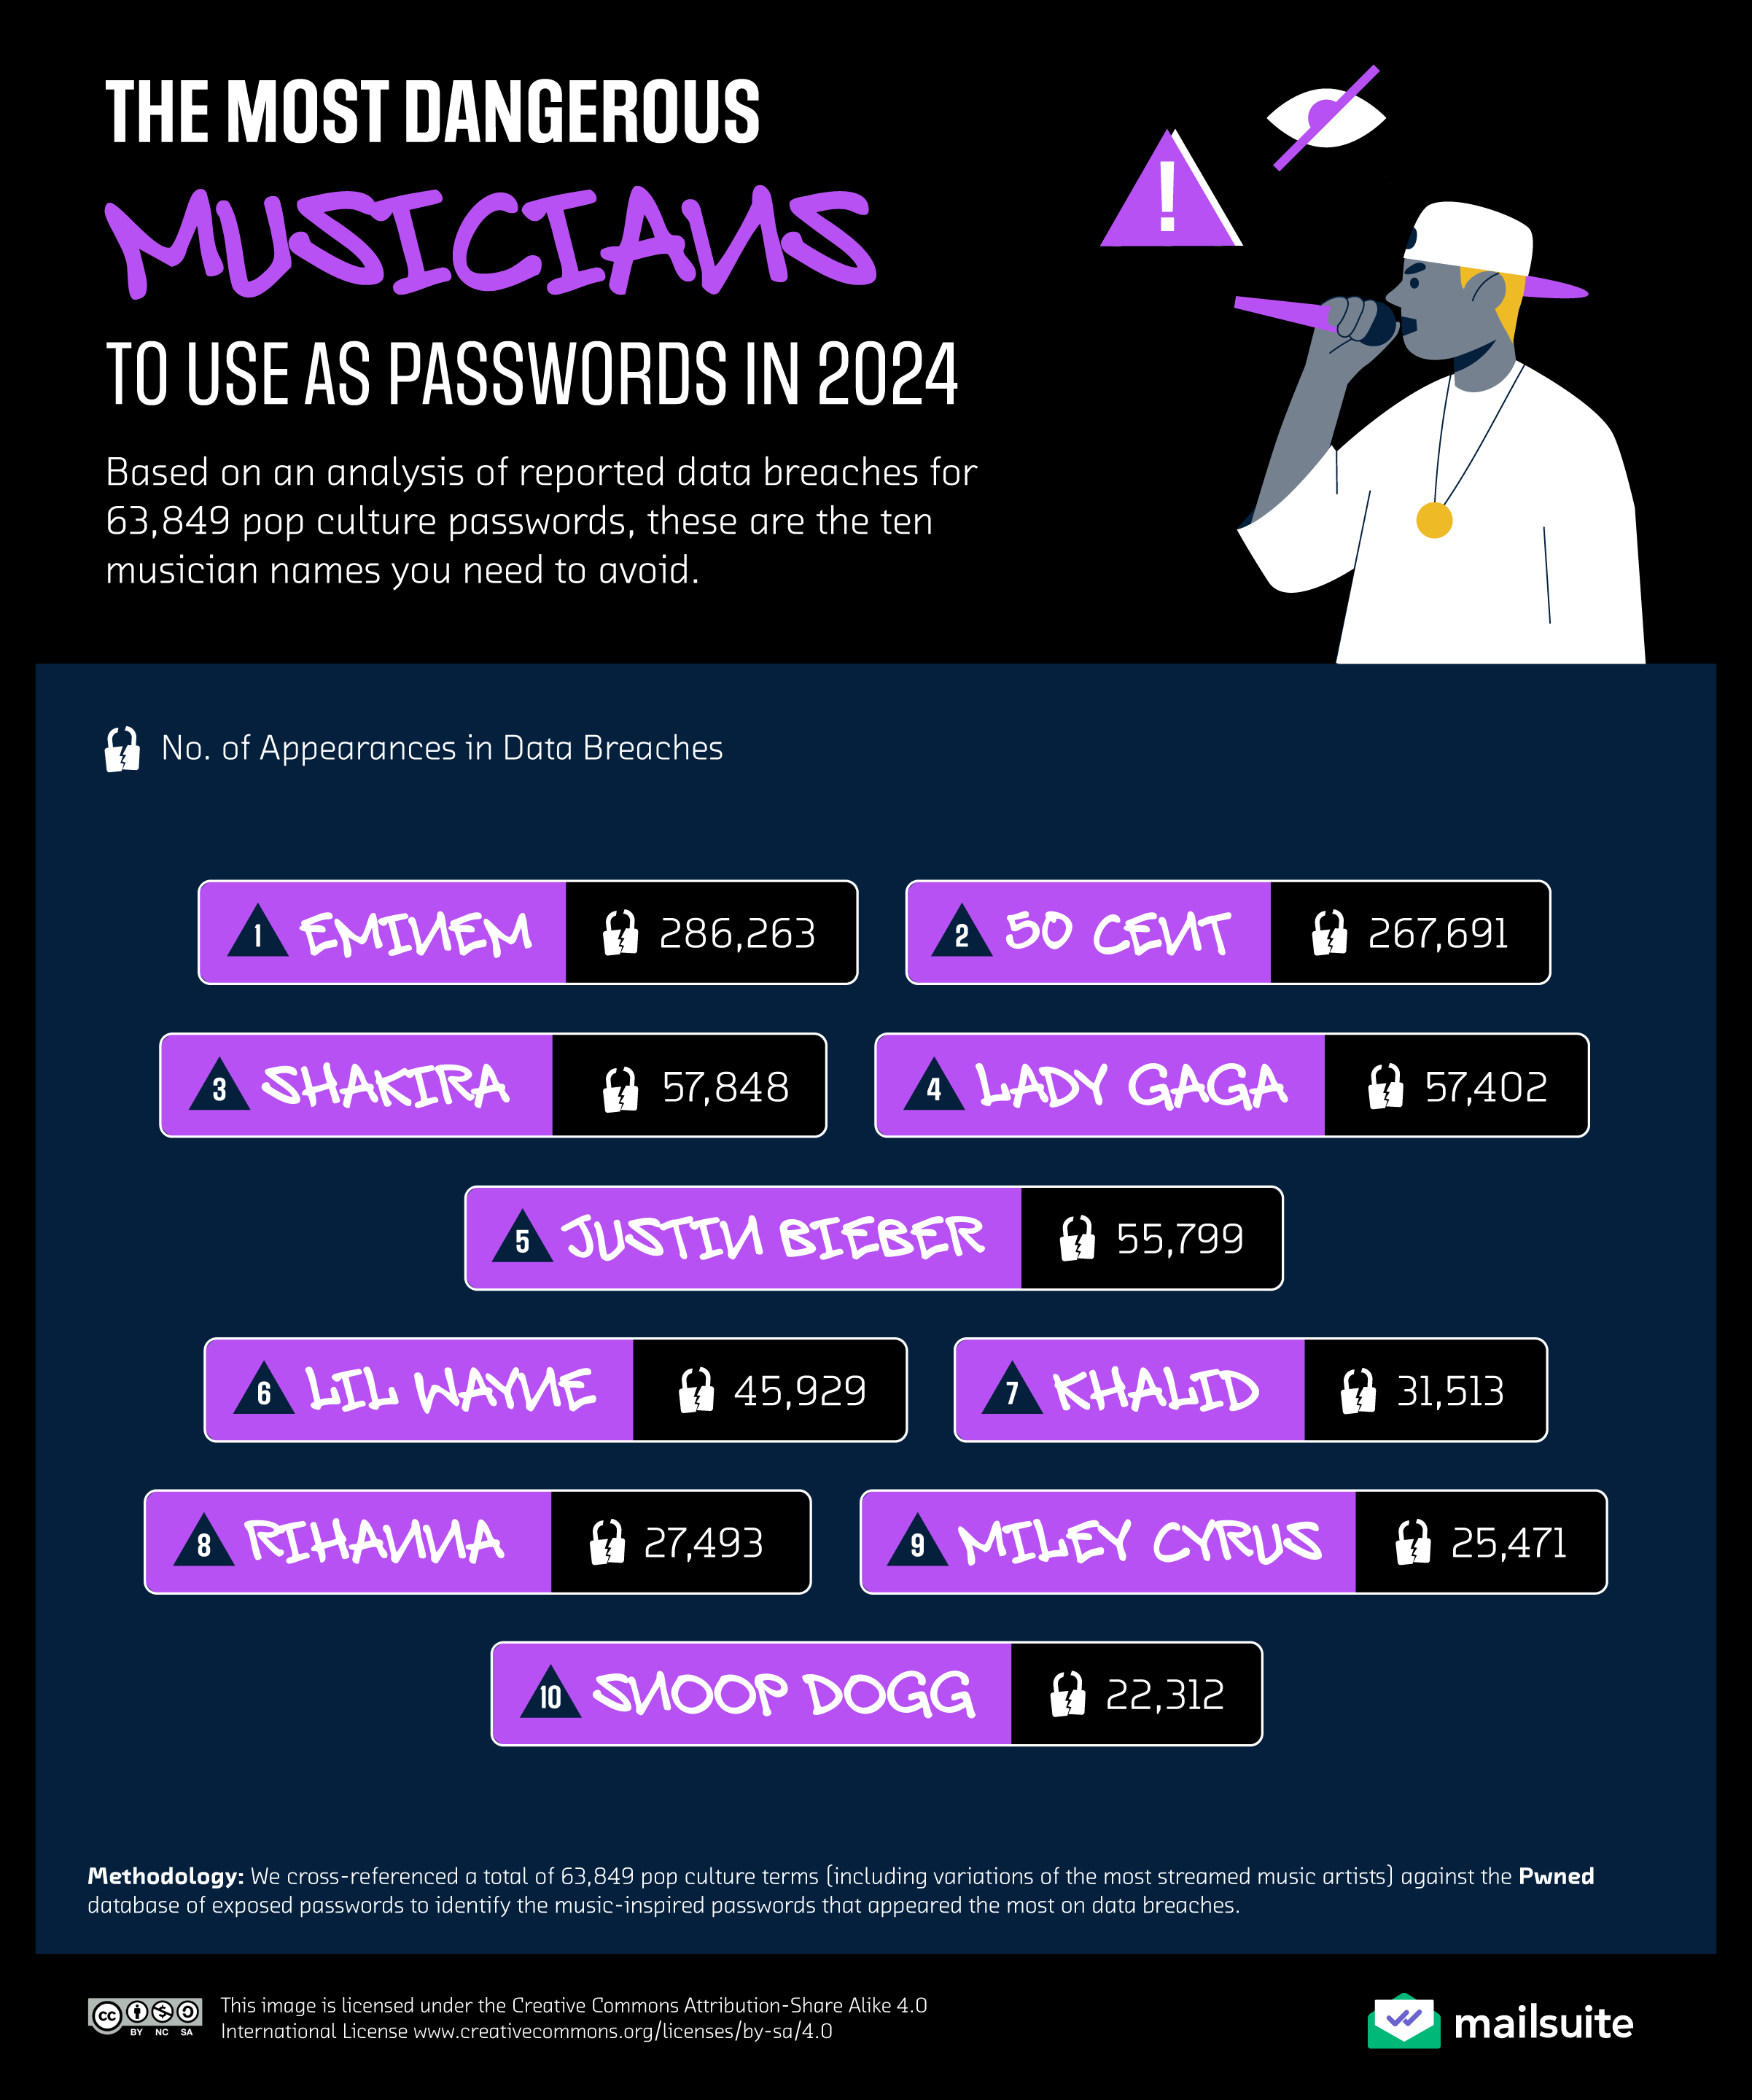 The Most Dangerous Musicians to Use As Passwords in 2024